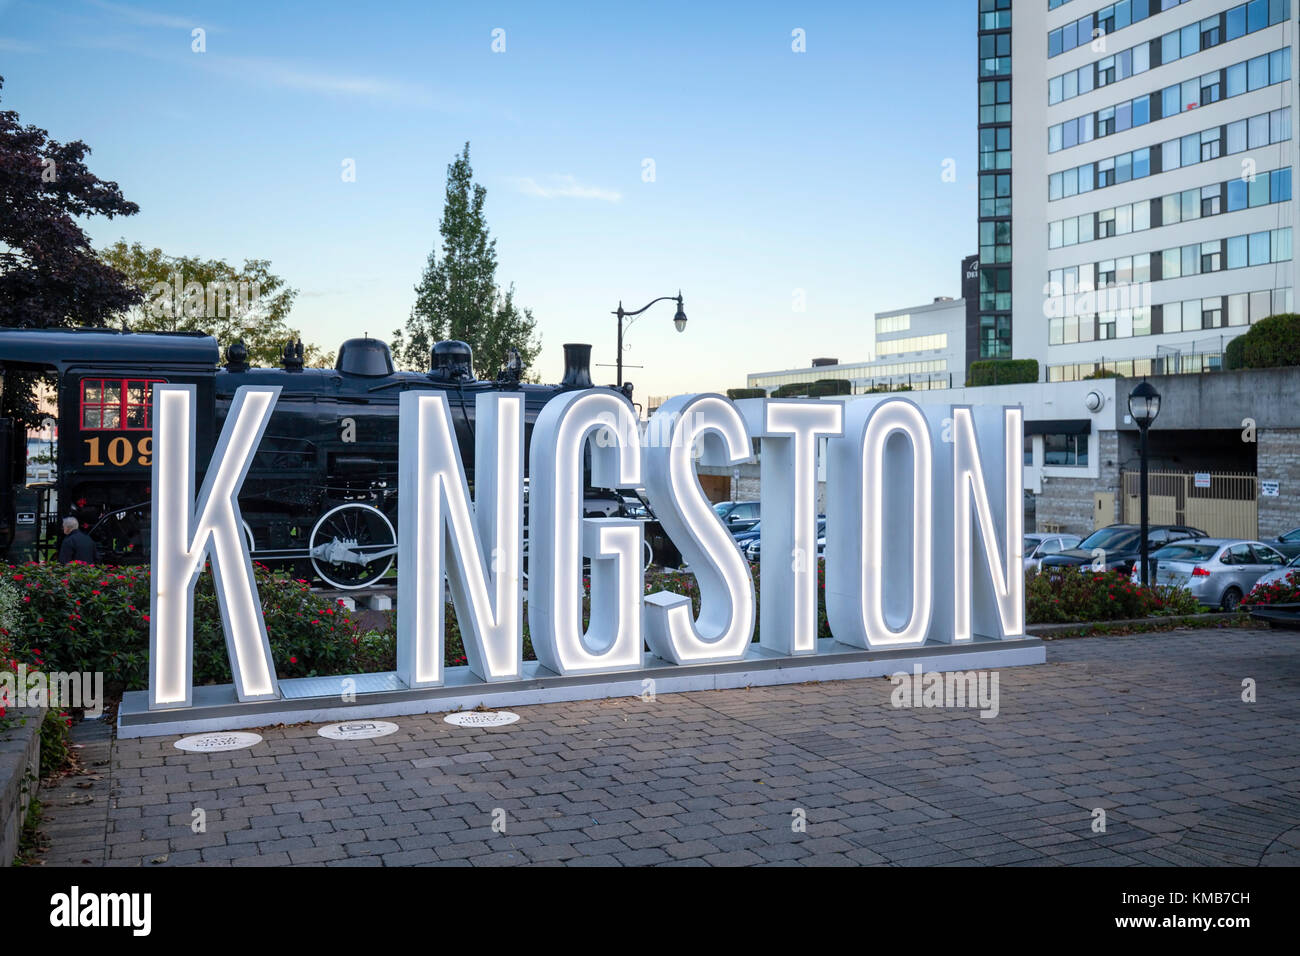 An illuminated sign for the city of Kingston called the 'I in Kingston' is a tourist attraction in downtown Kingston, Ontario, Canada. Stock Photo